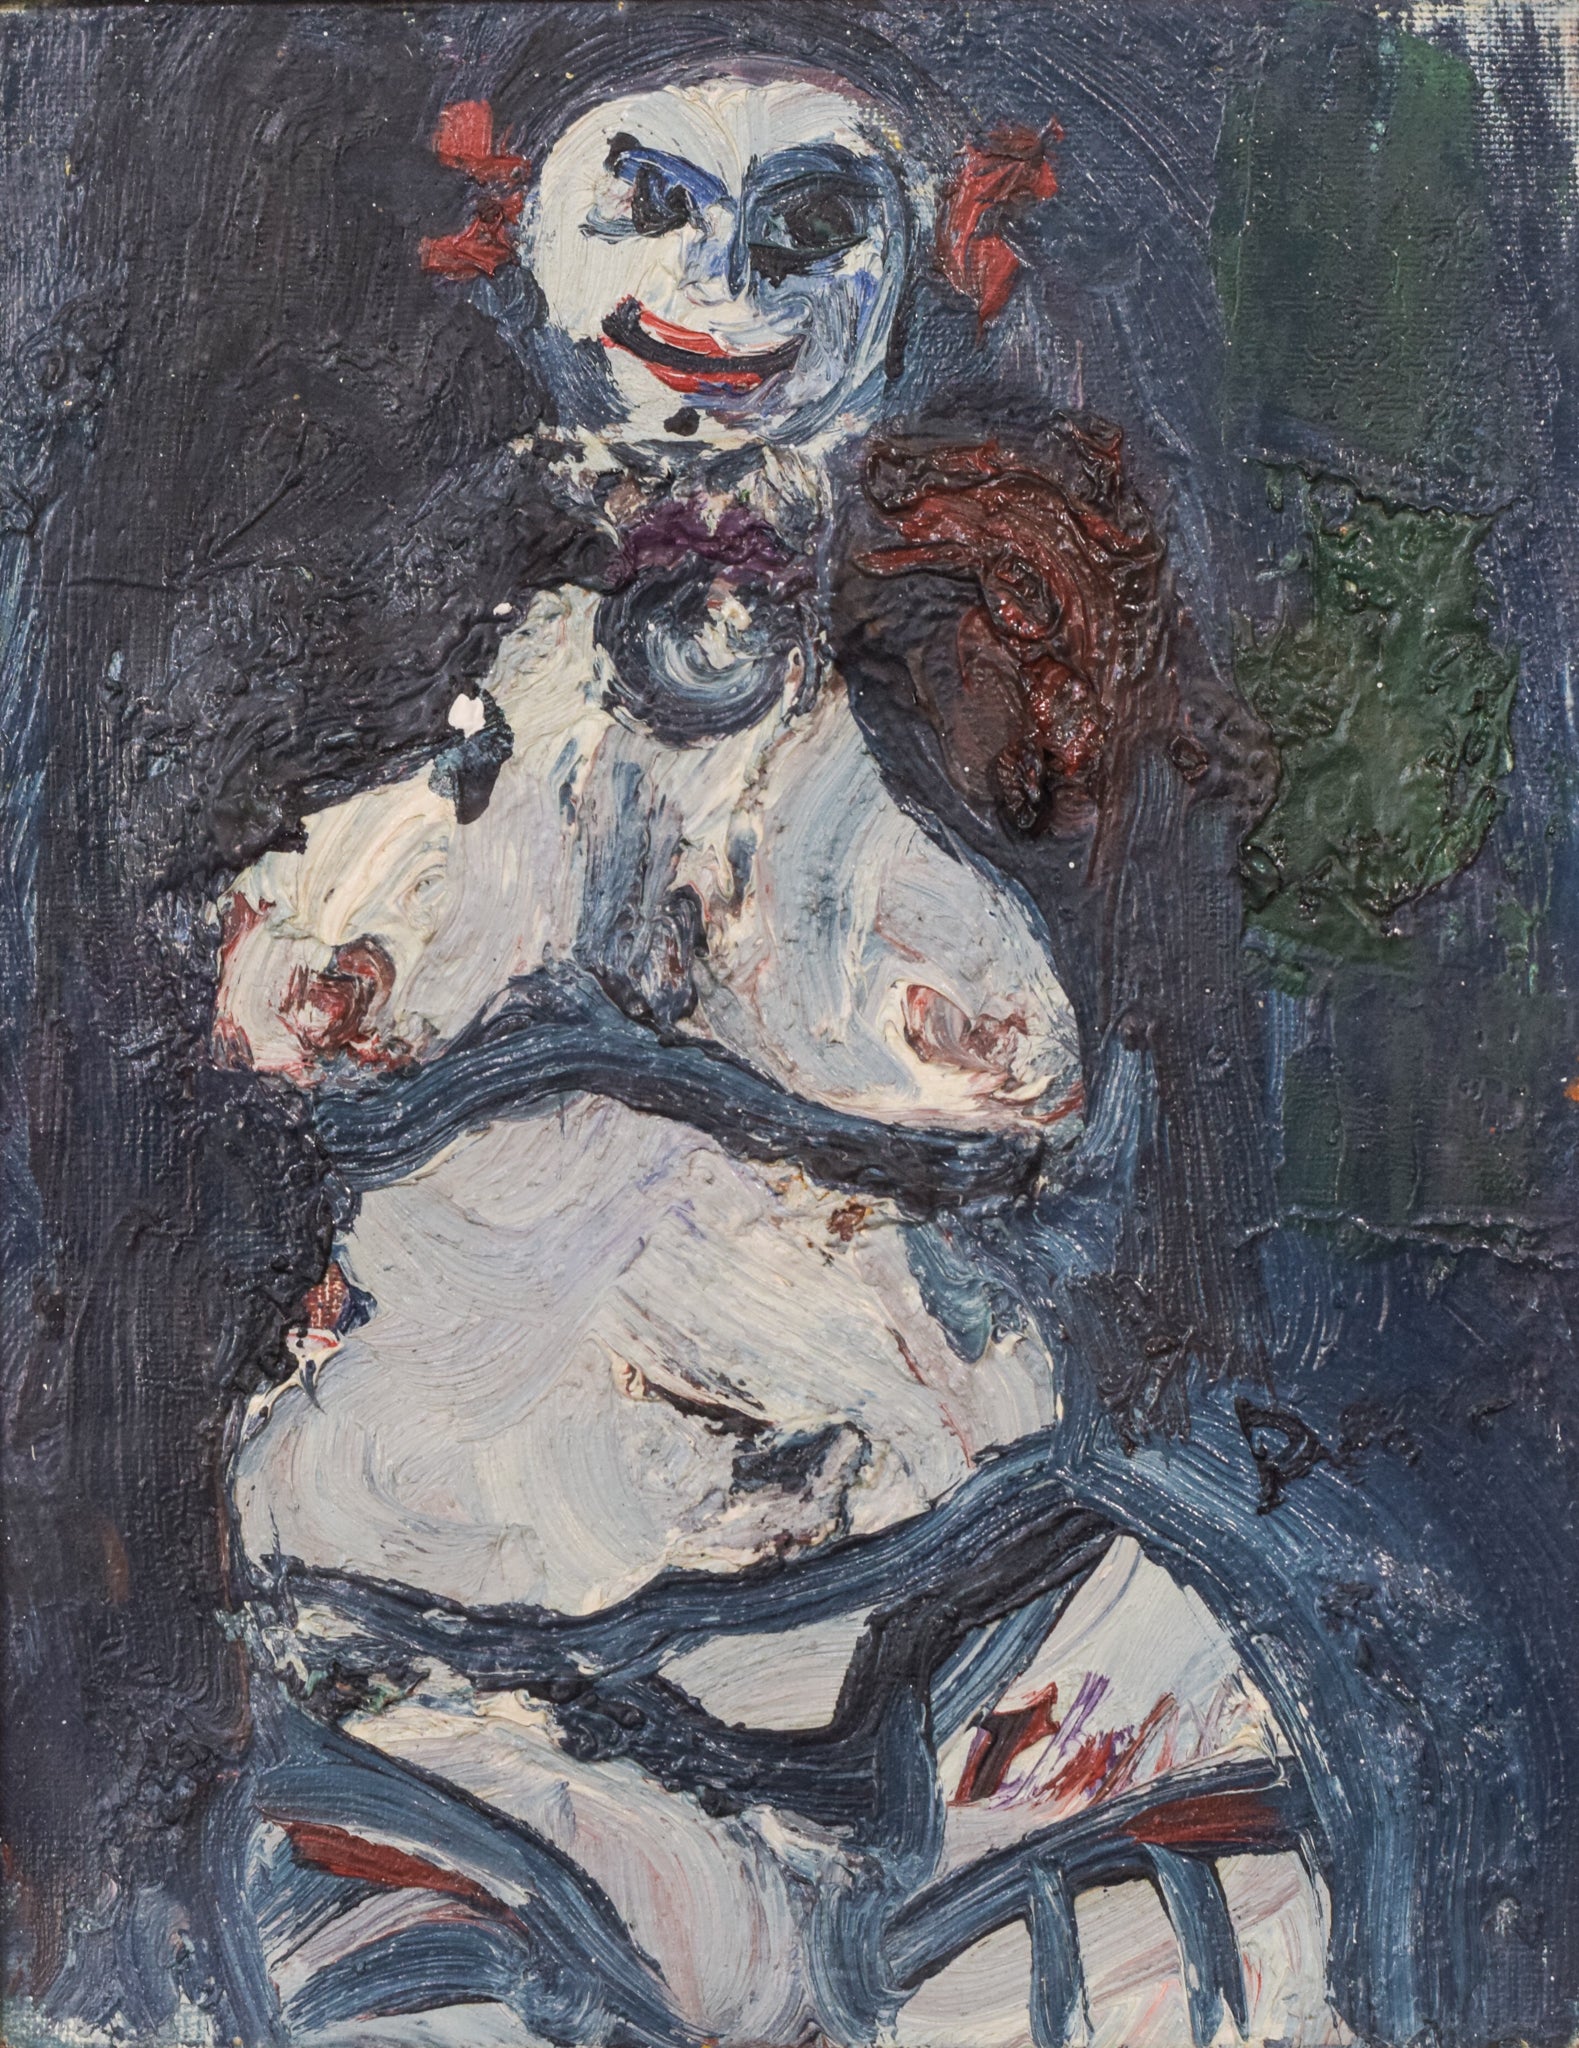 Expressionist Oil Painting of a Clown